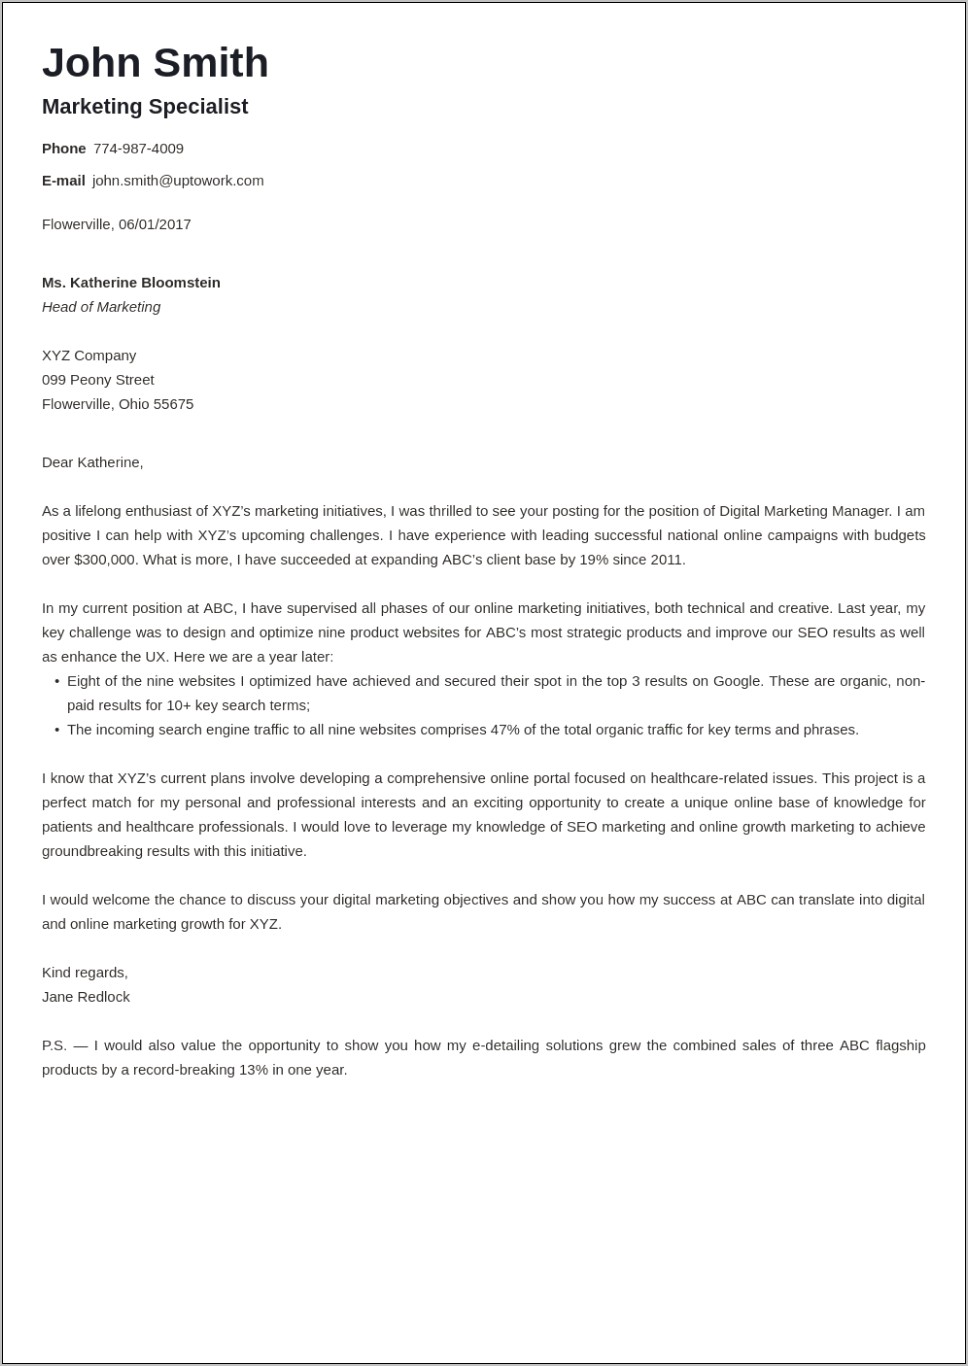 Profesional Resume With Cover Letter Examples